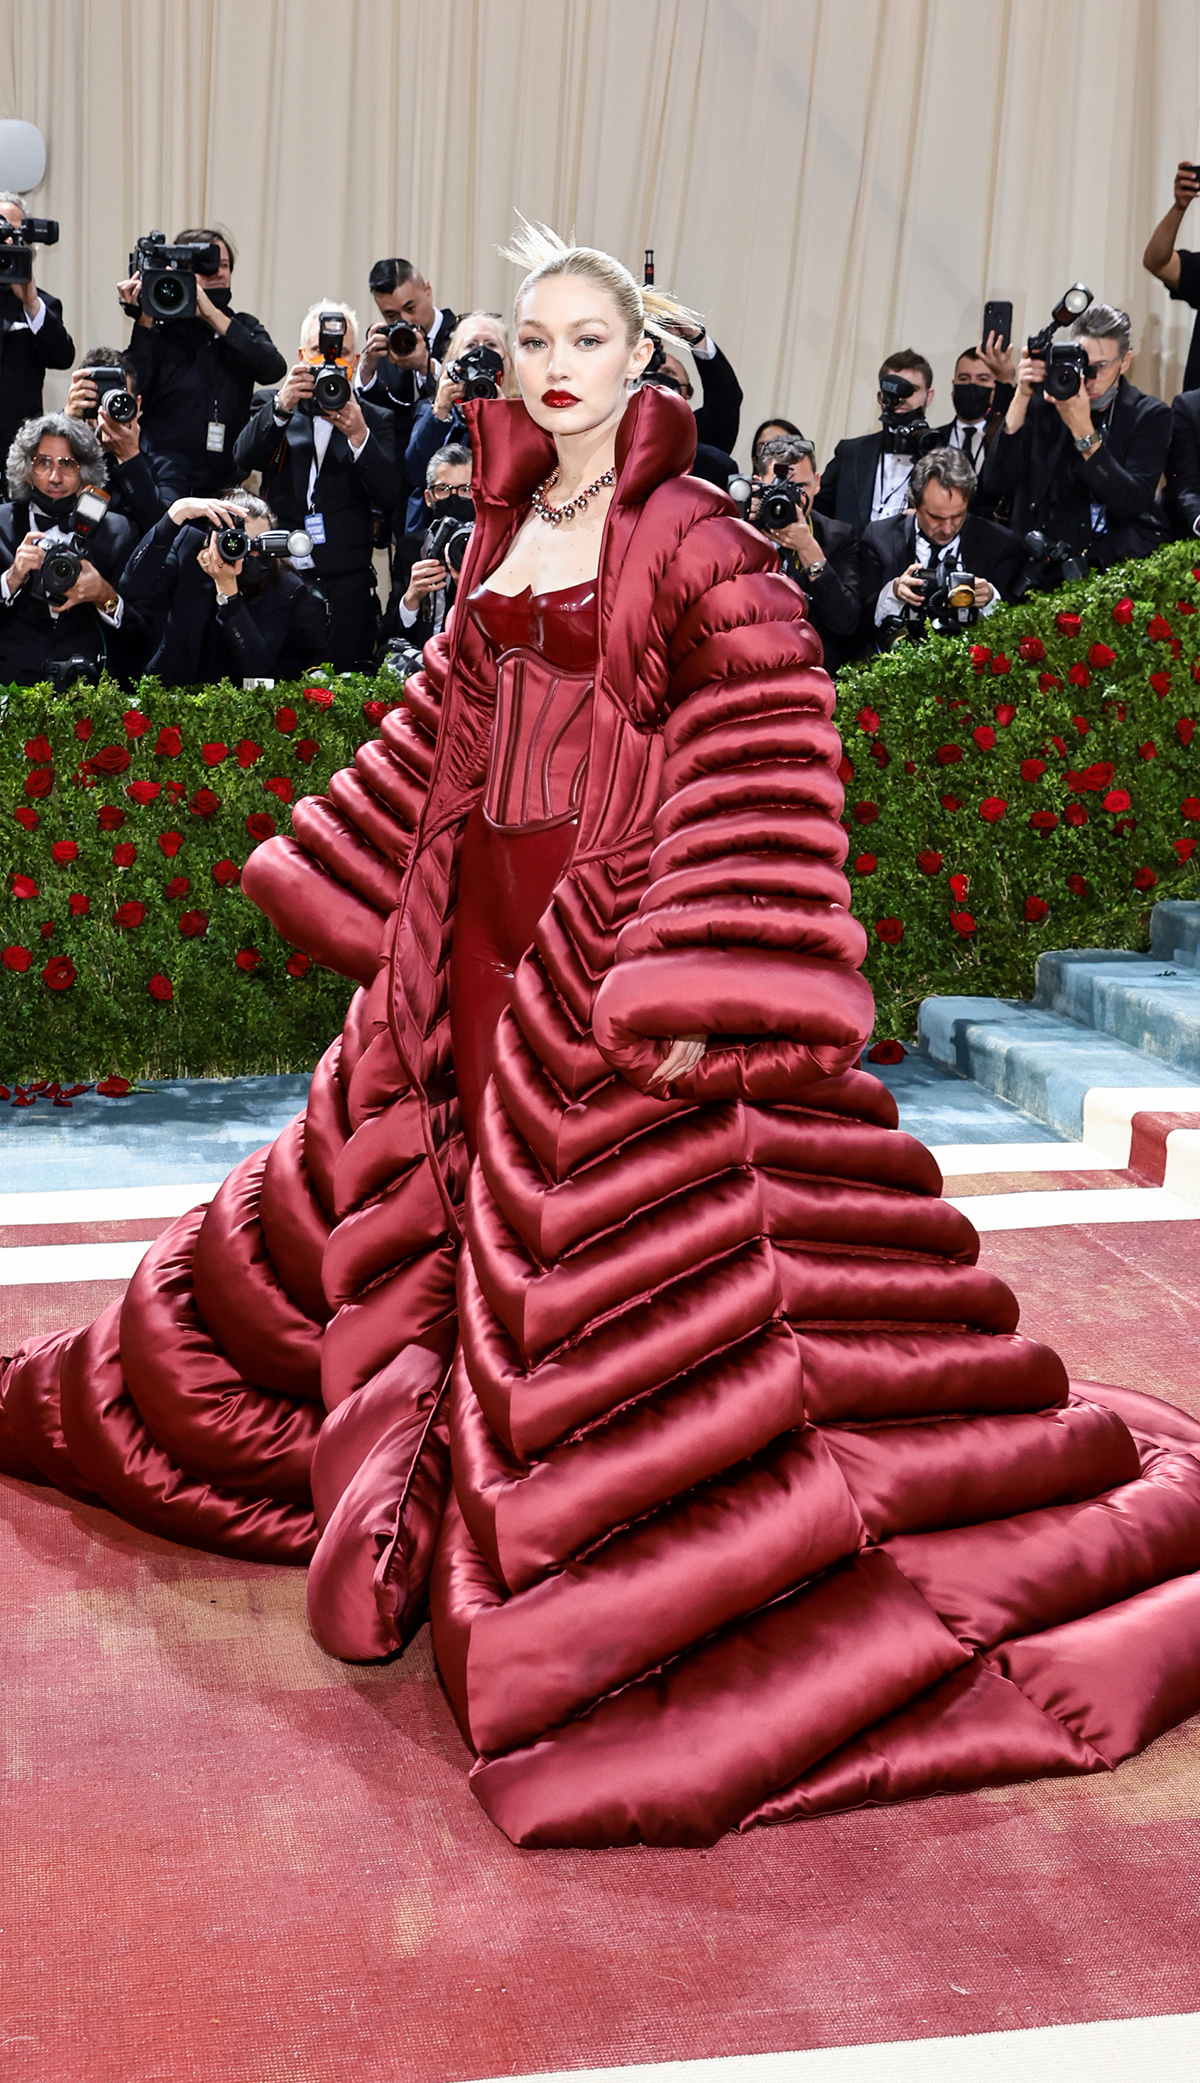 Met Gala 2022 Fashion: See Every Red Carpet Look